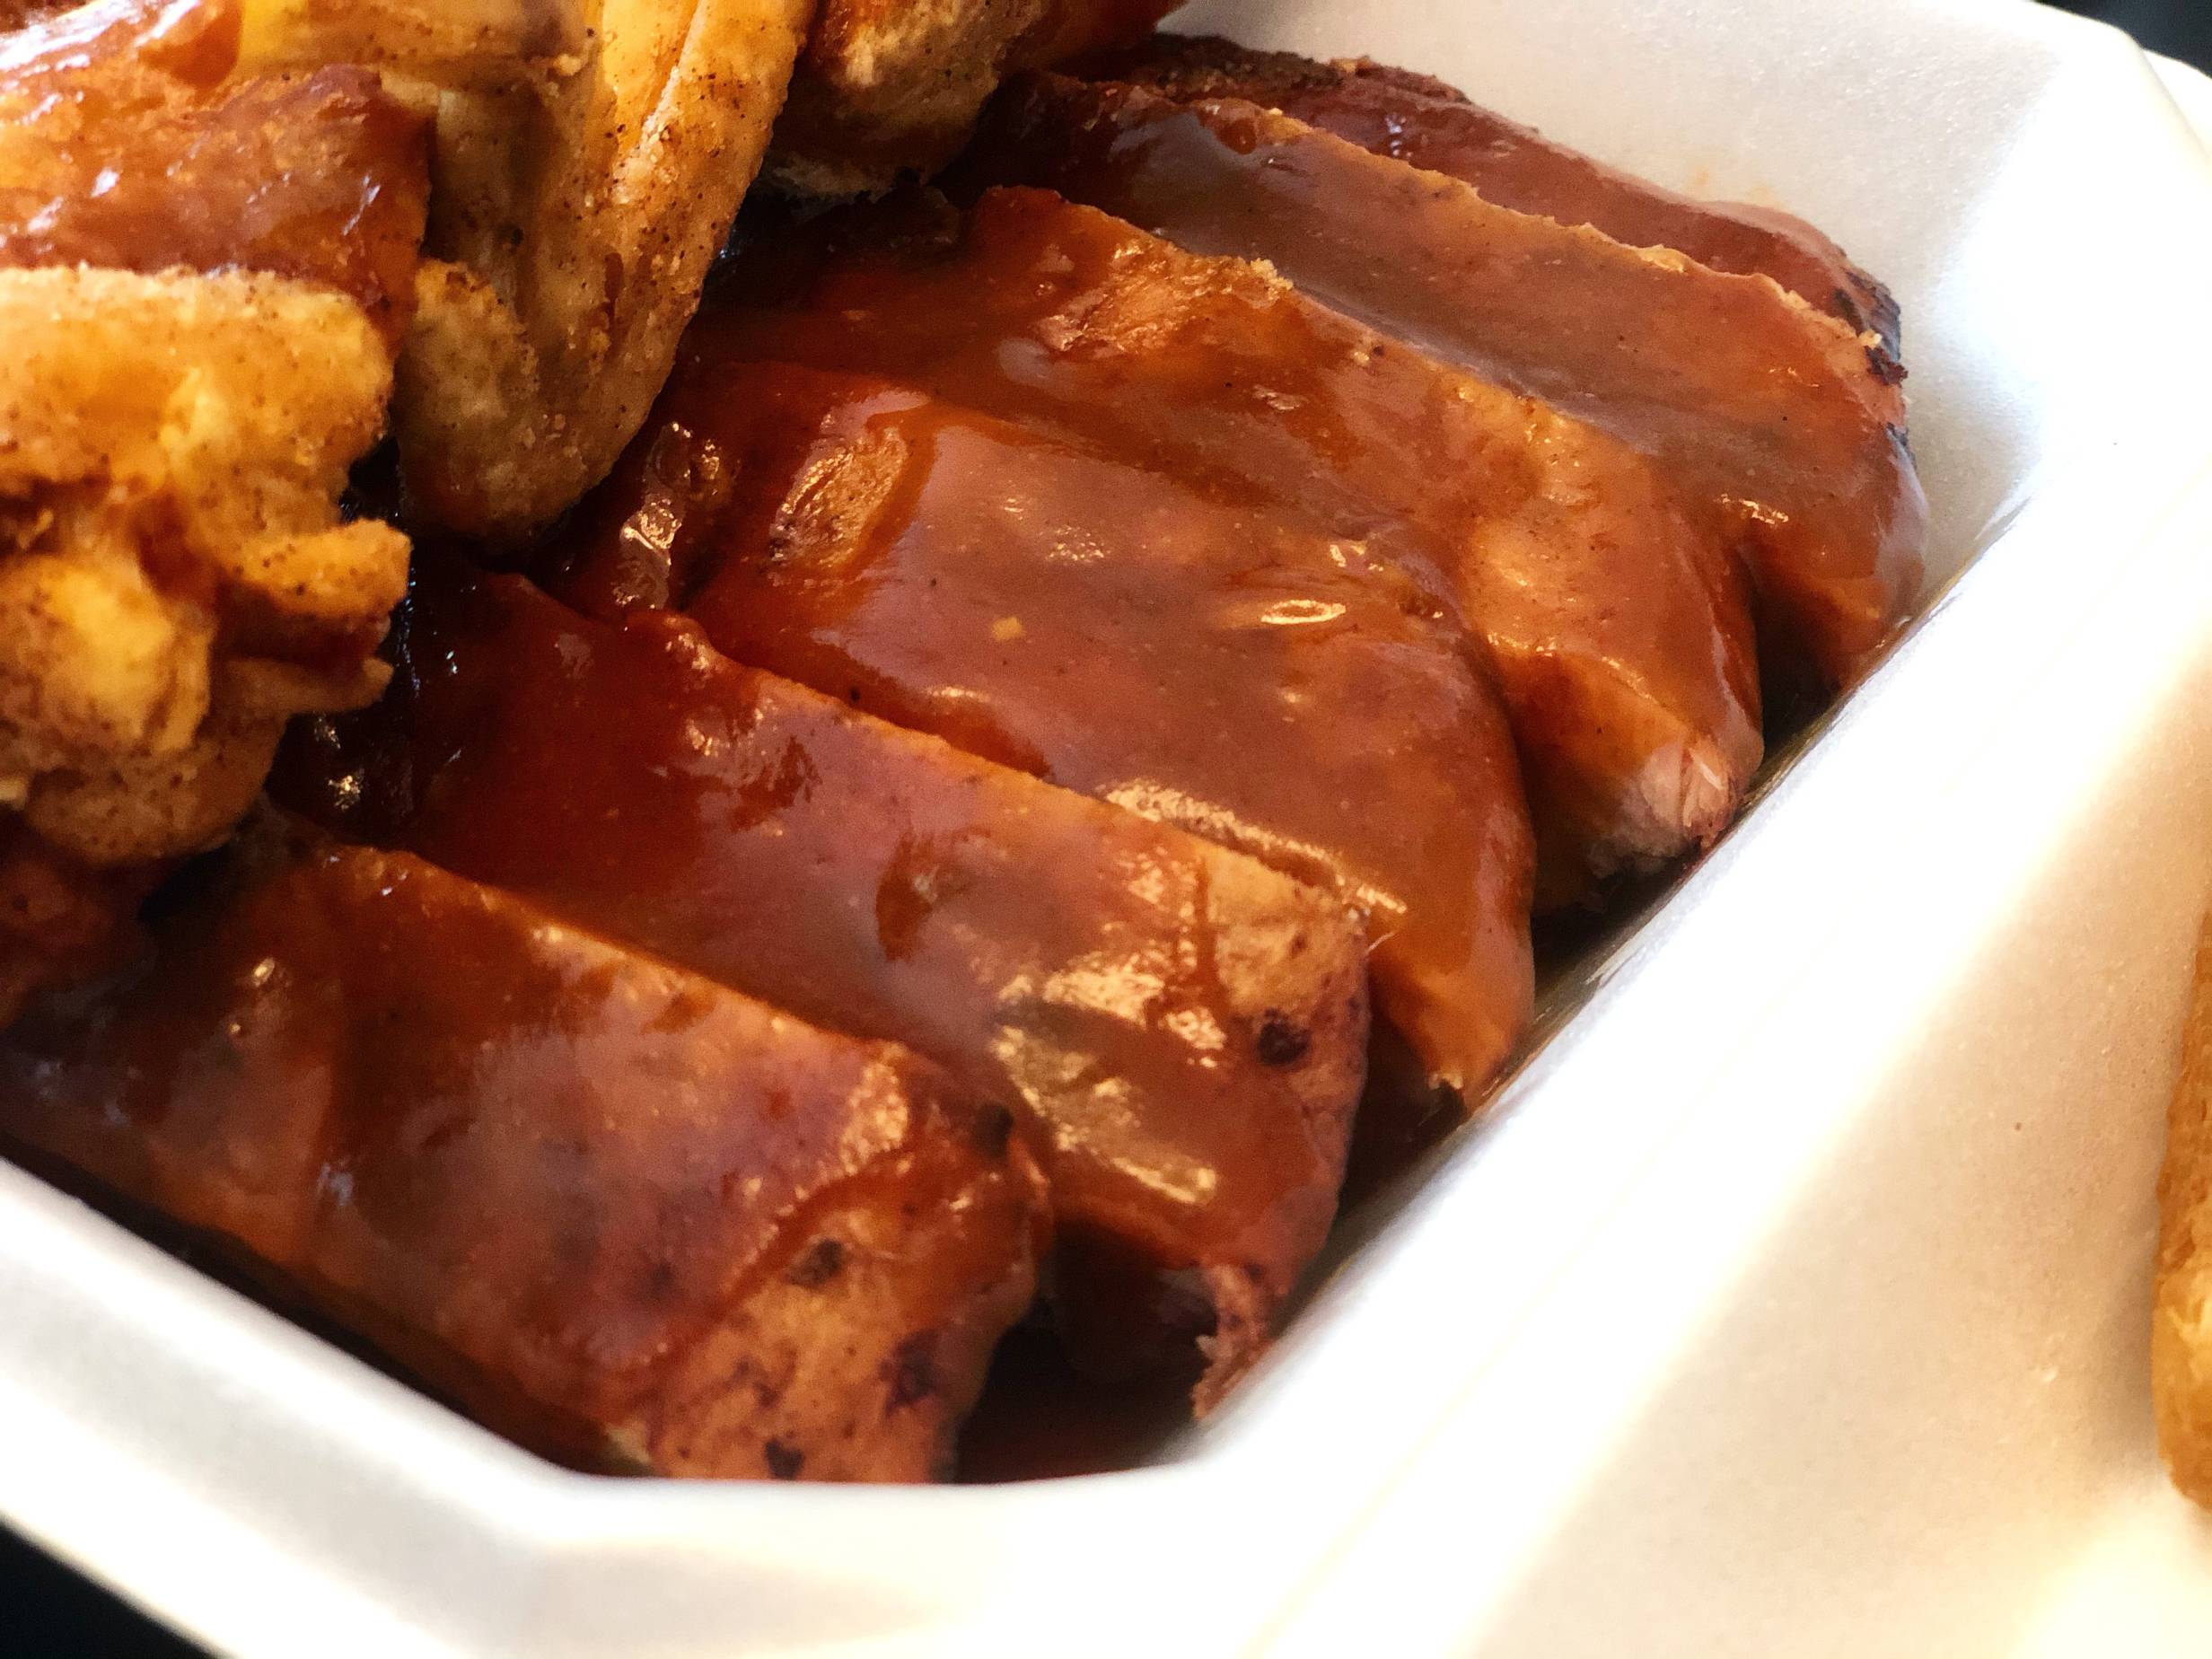 Several ribs covered in sauce sit in a white styrofoam container. Photo by Alyssa Buckley.